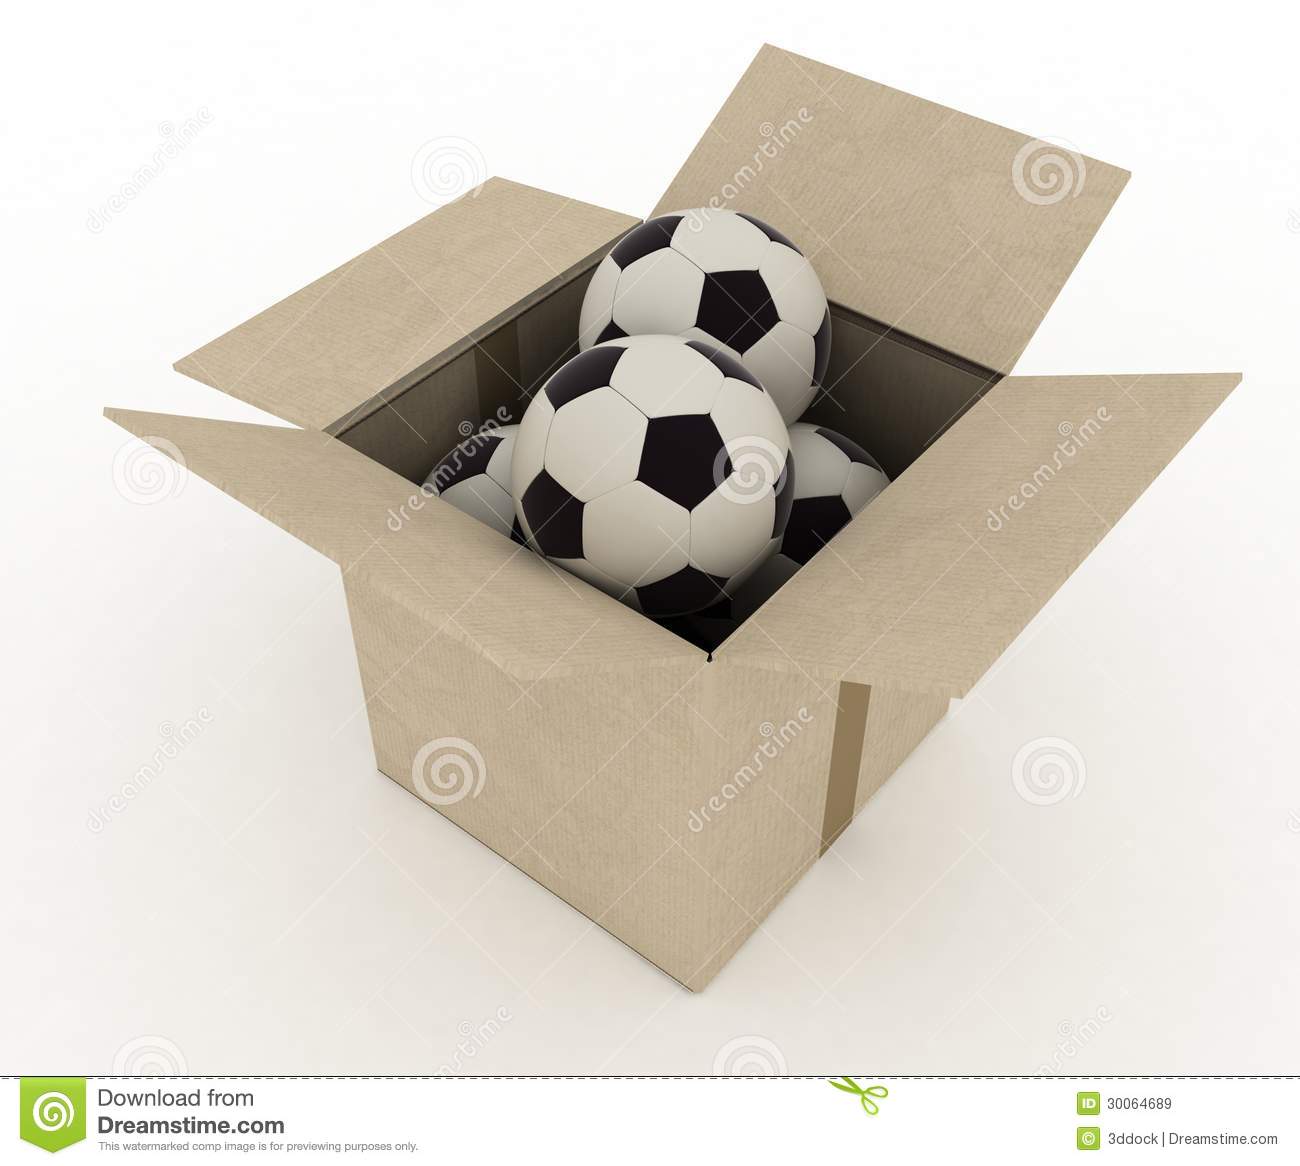 Sport Soccer Balls In Carton Box Royalty Free Stock Images   Image